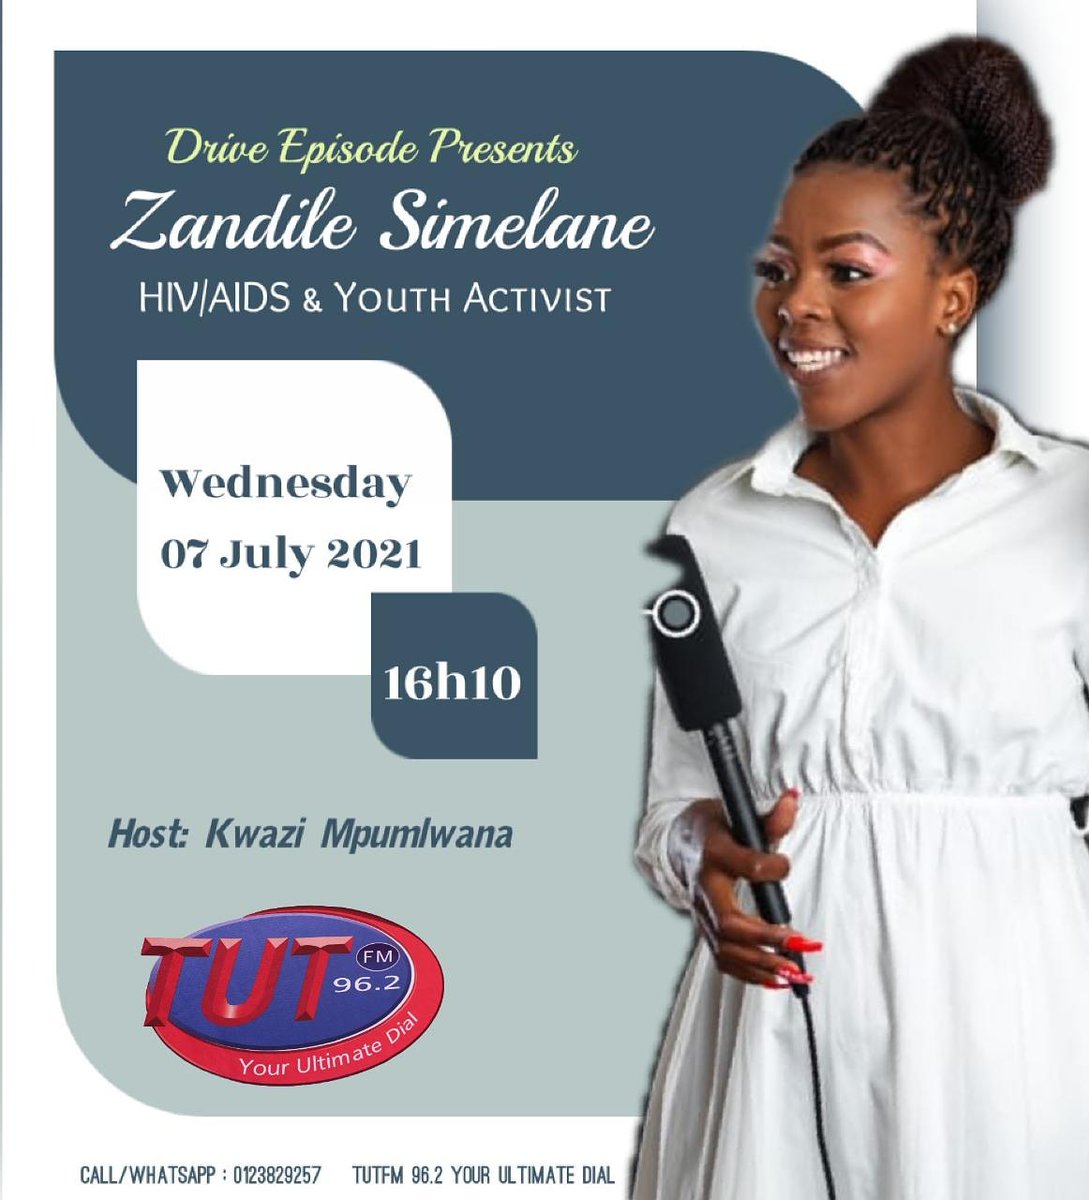 Join me every week on Wednesdays at TUTfm 96.2 for the month of July as we continue with #ZanSaidRadio tour. 

We continue to unpack everything around HIV/AIDS and youth affairs.

#ZanSaid #Radio #ART #Advocacy #livingpositively  

❤️ ZanSaid